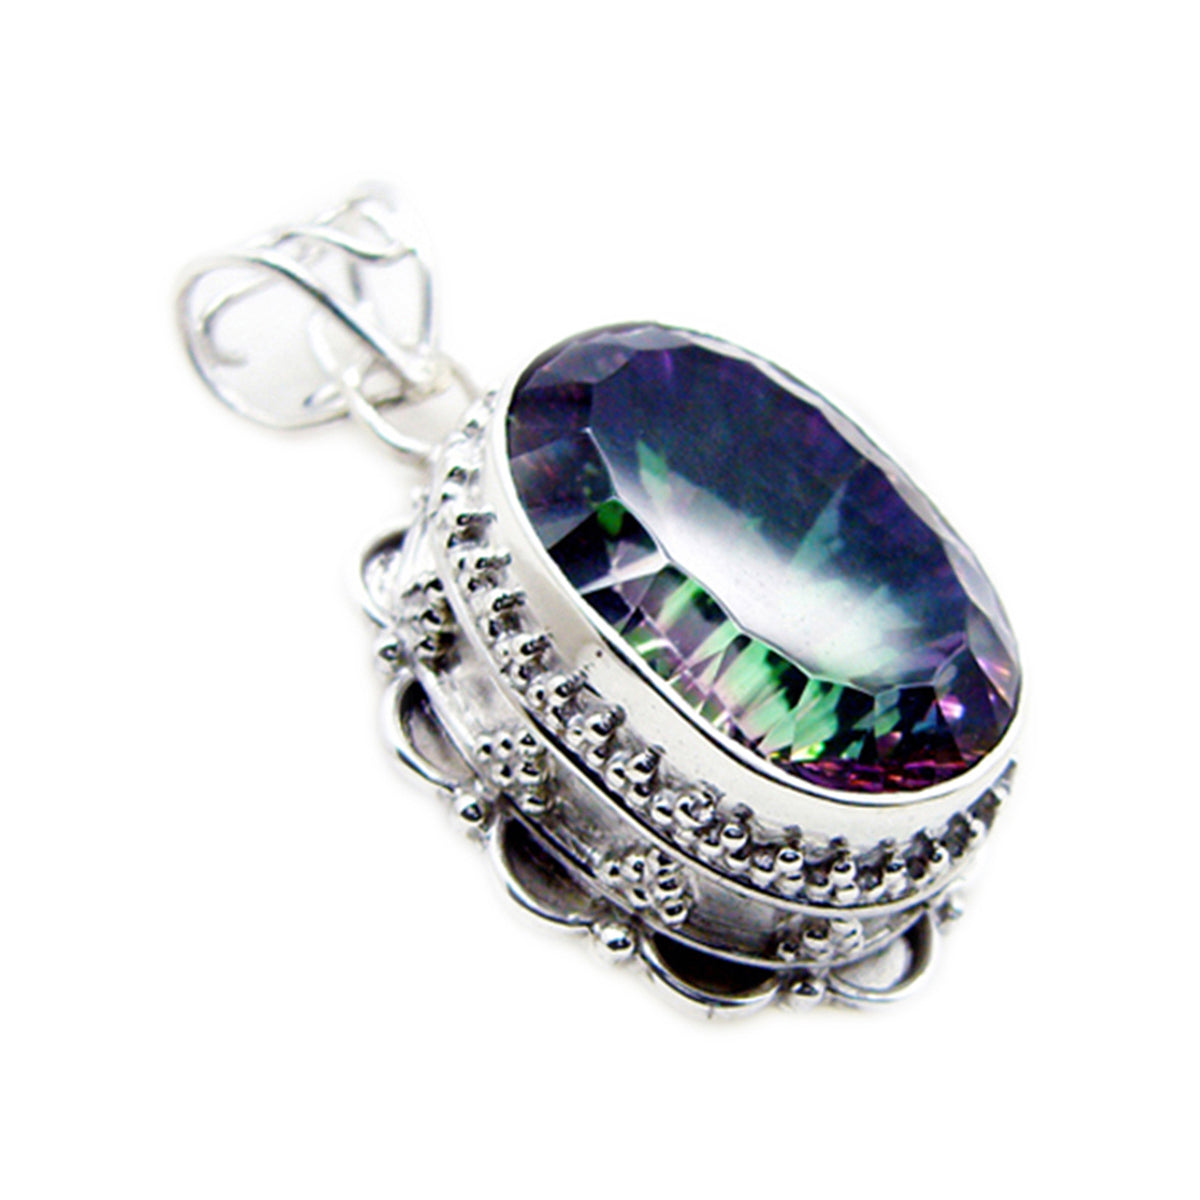 Riyo Winsome Gemstone Oval Faceted Multi Color Mystic Quartz Sterling Silver Pendant Gift For Handmade